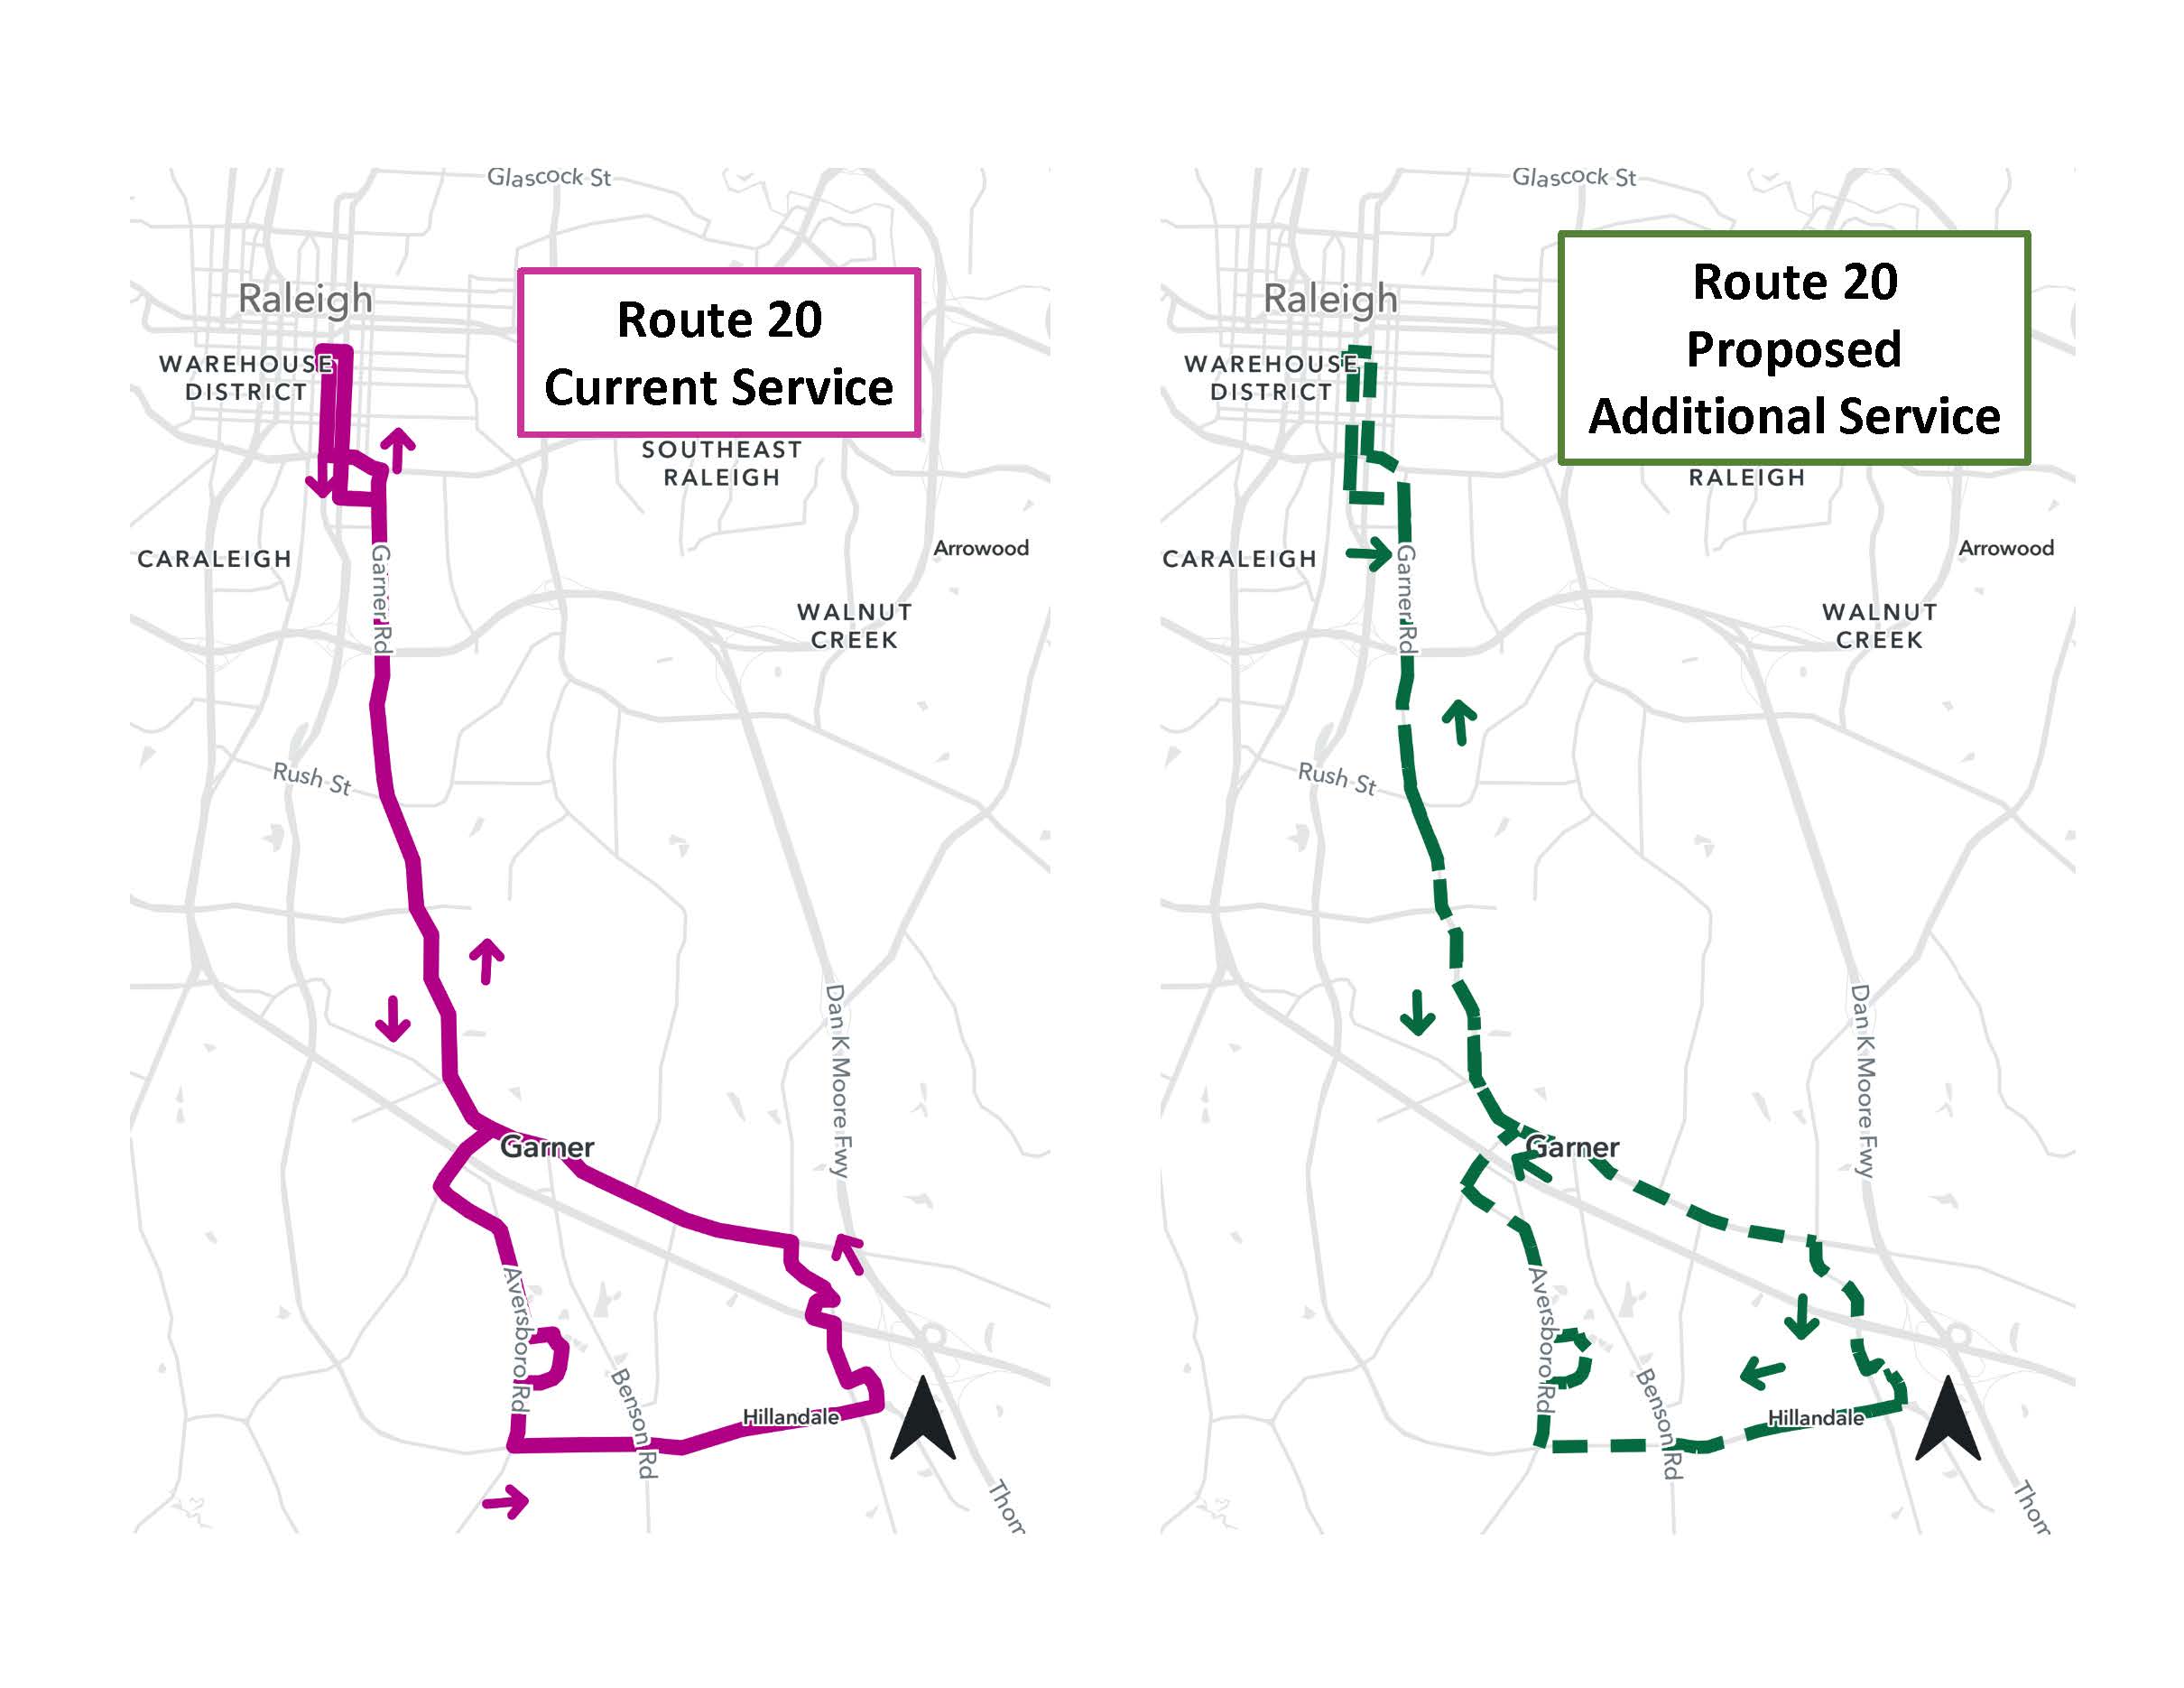 Current Map of Garner Route and Proposed Map with Bidirectional Service